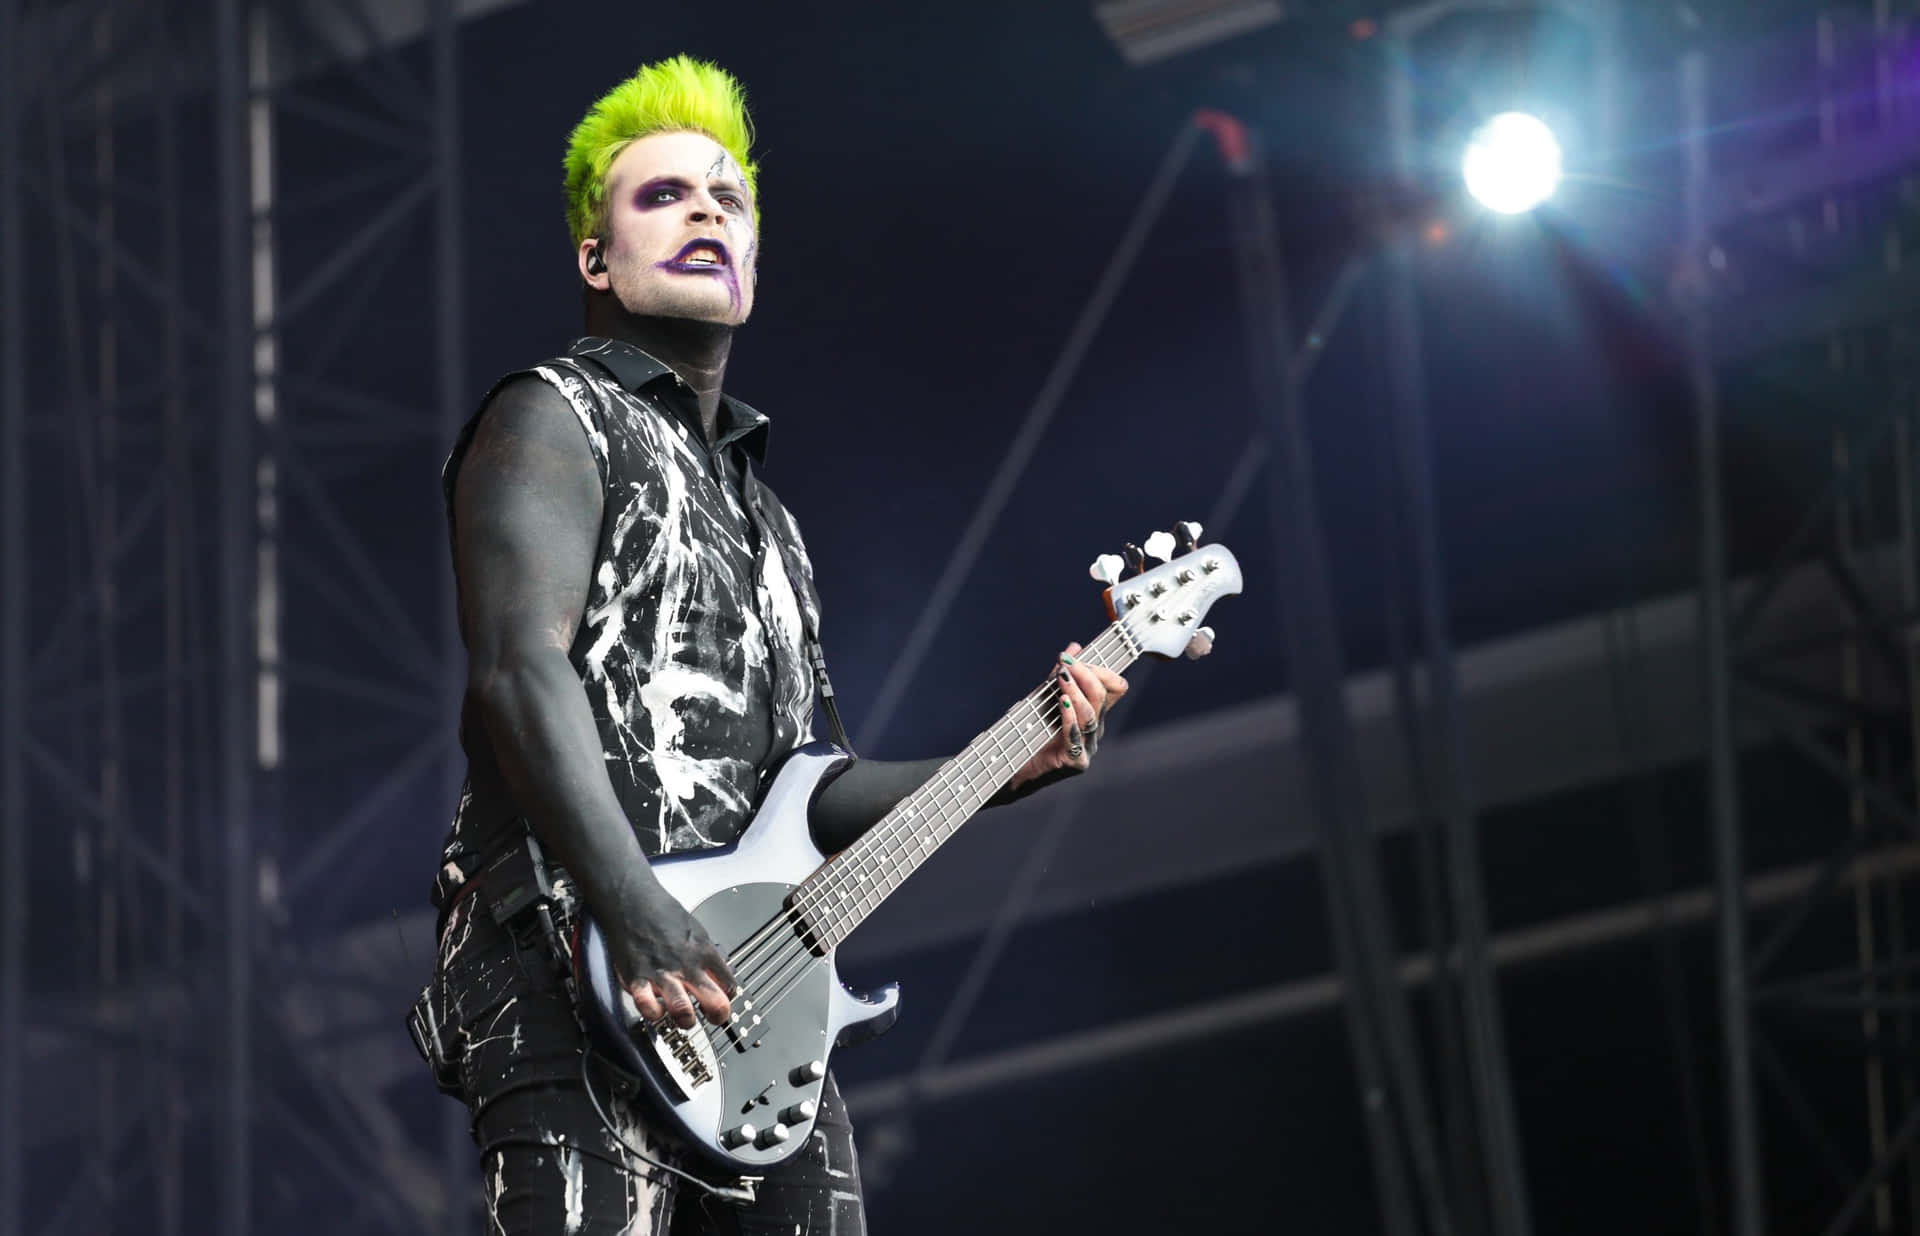 Green Haired Bassist On Stage.jpg